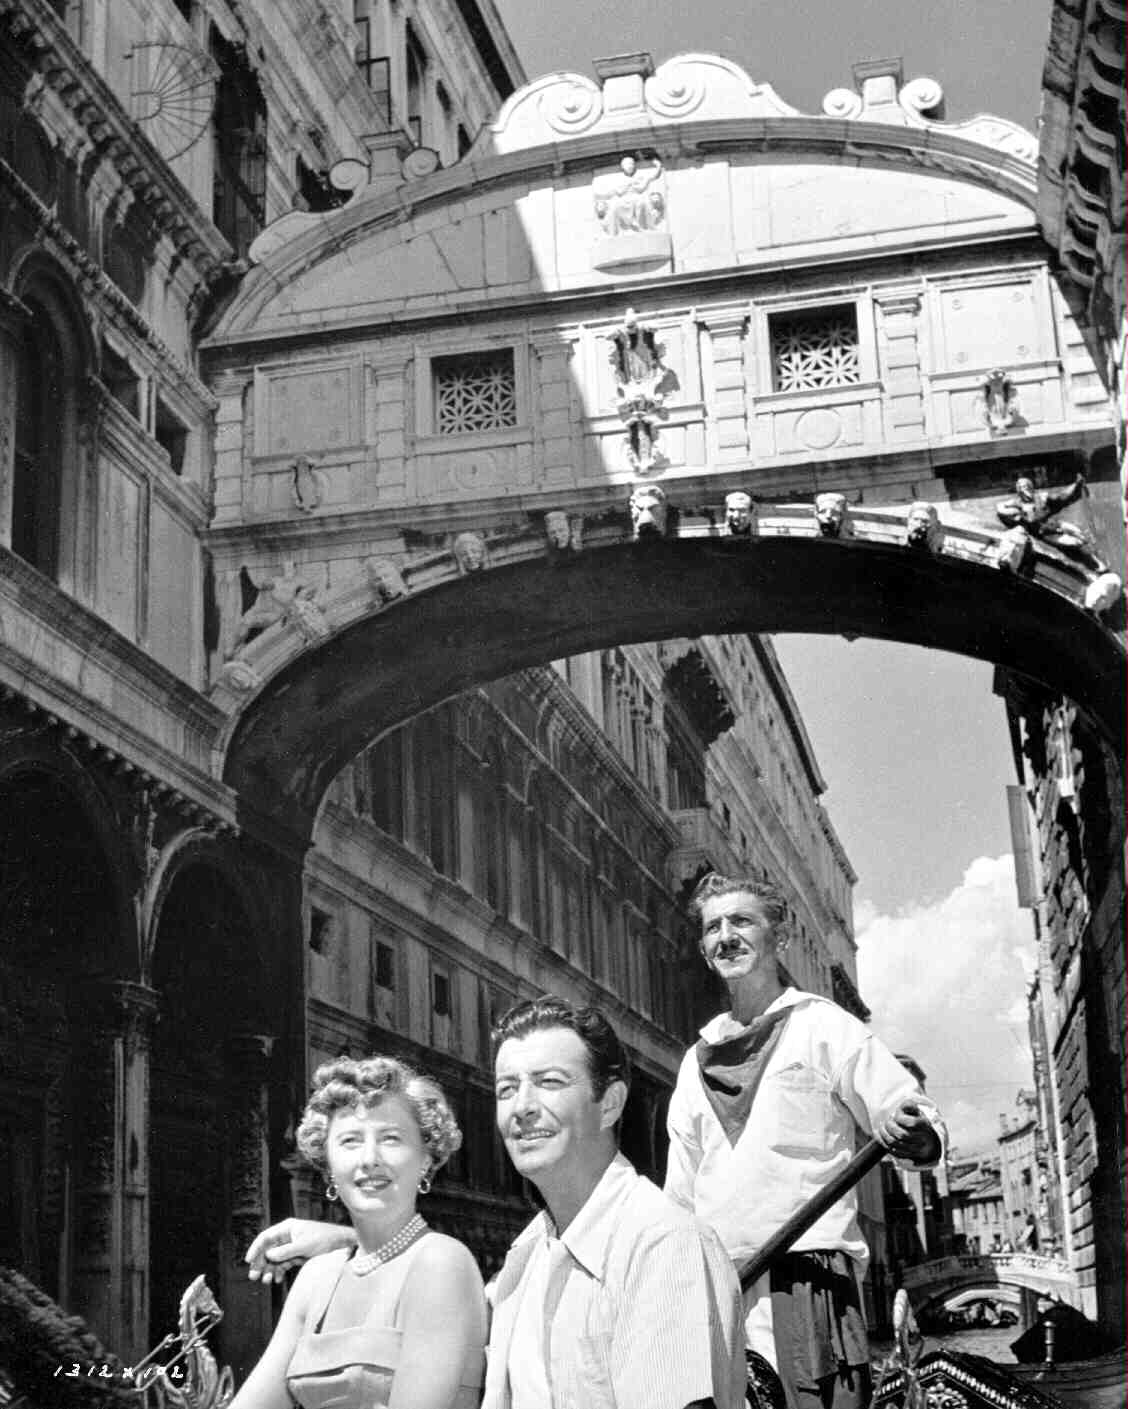 Taylor and Stanwyck in Italy, 1950 | Robert Taylor Actor